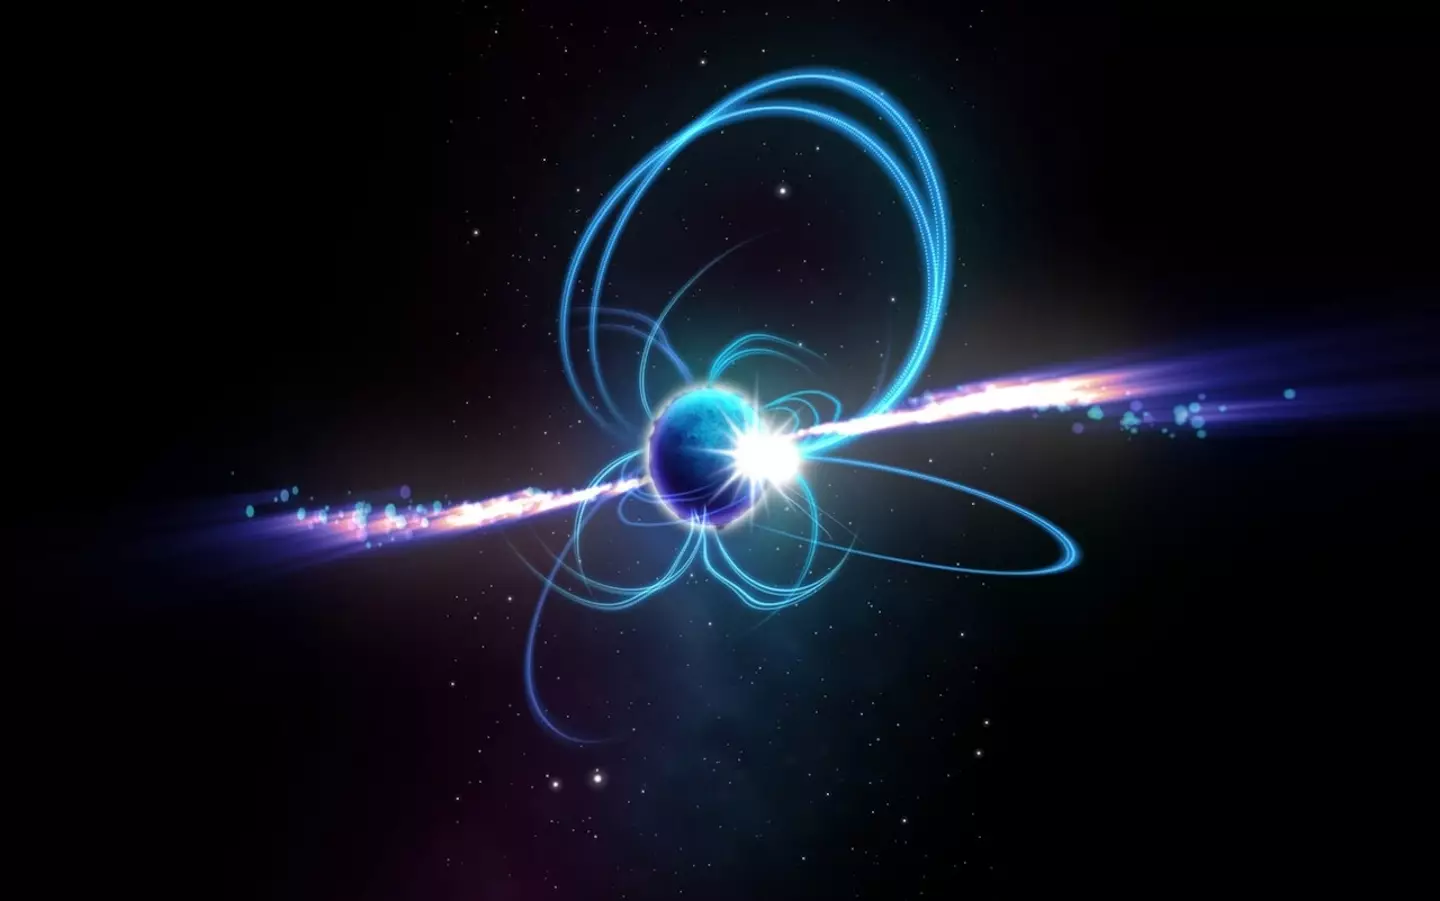 An artist's impression of what the thing could look like if it is a magnetar.